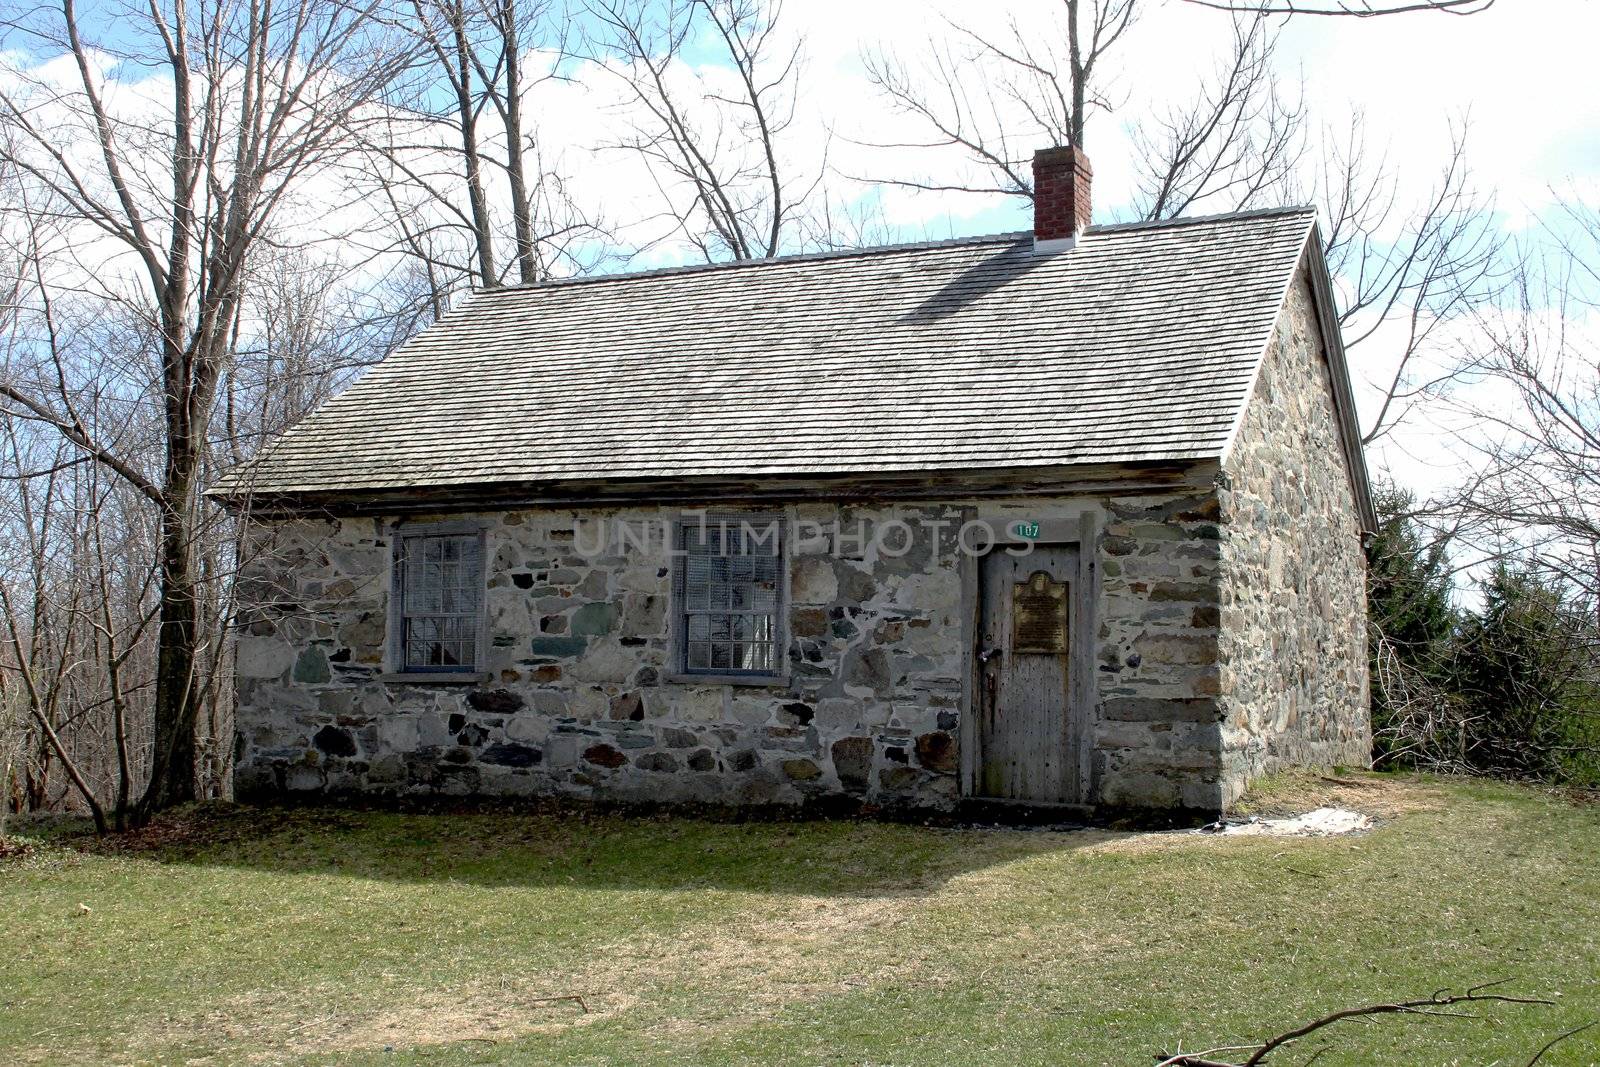 18th century school from the eastern townships